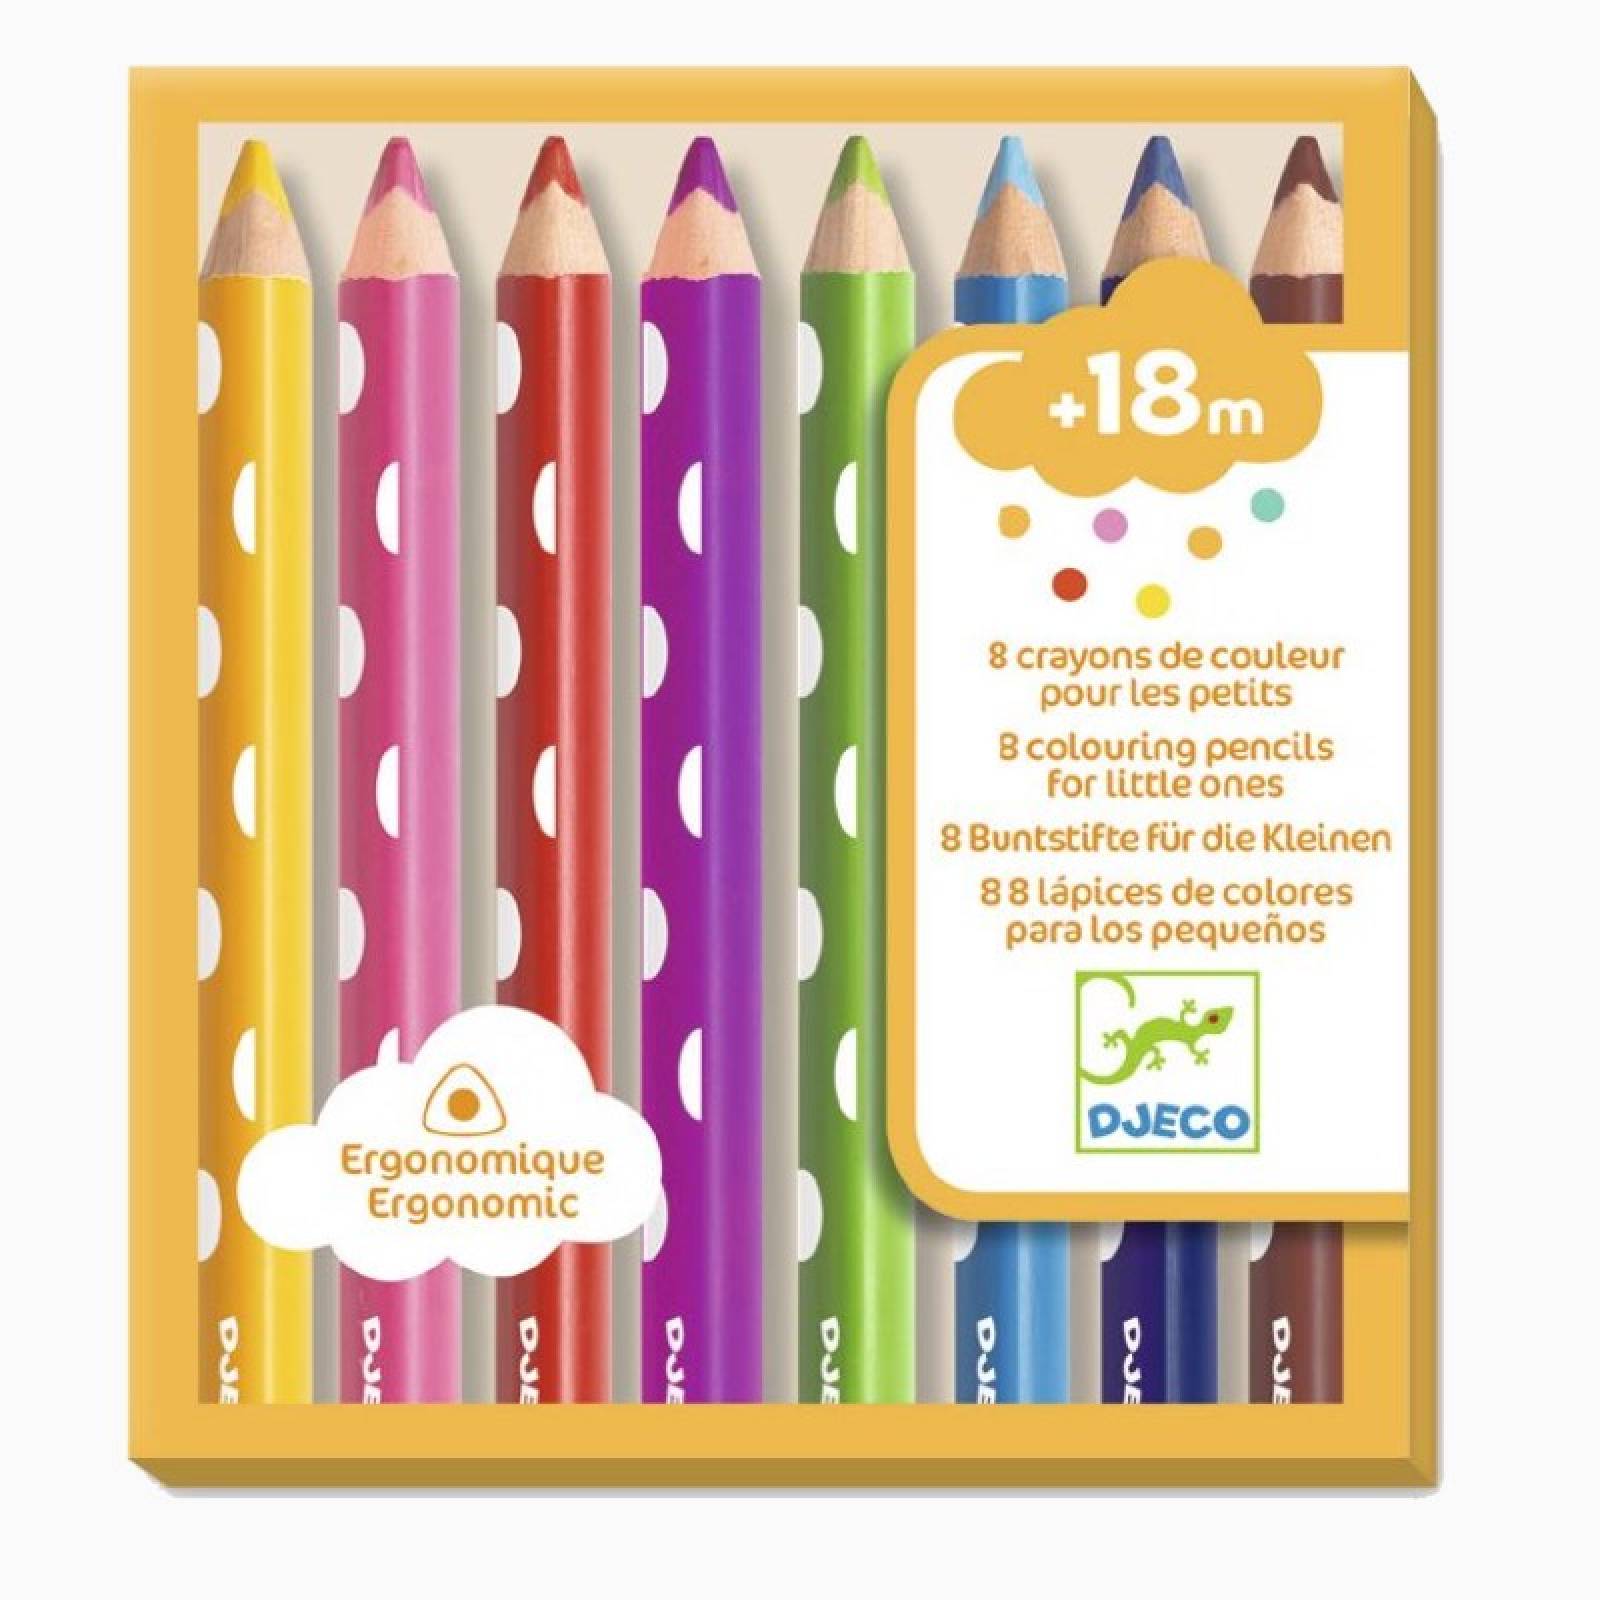 8 Colouring Pencils For Little Ones By Djeco 18m+